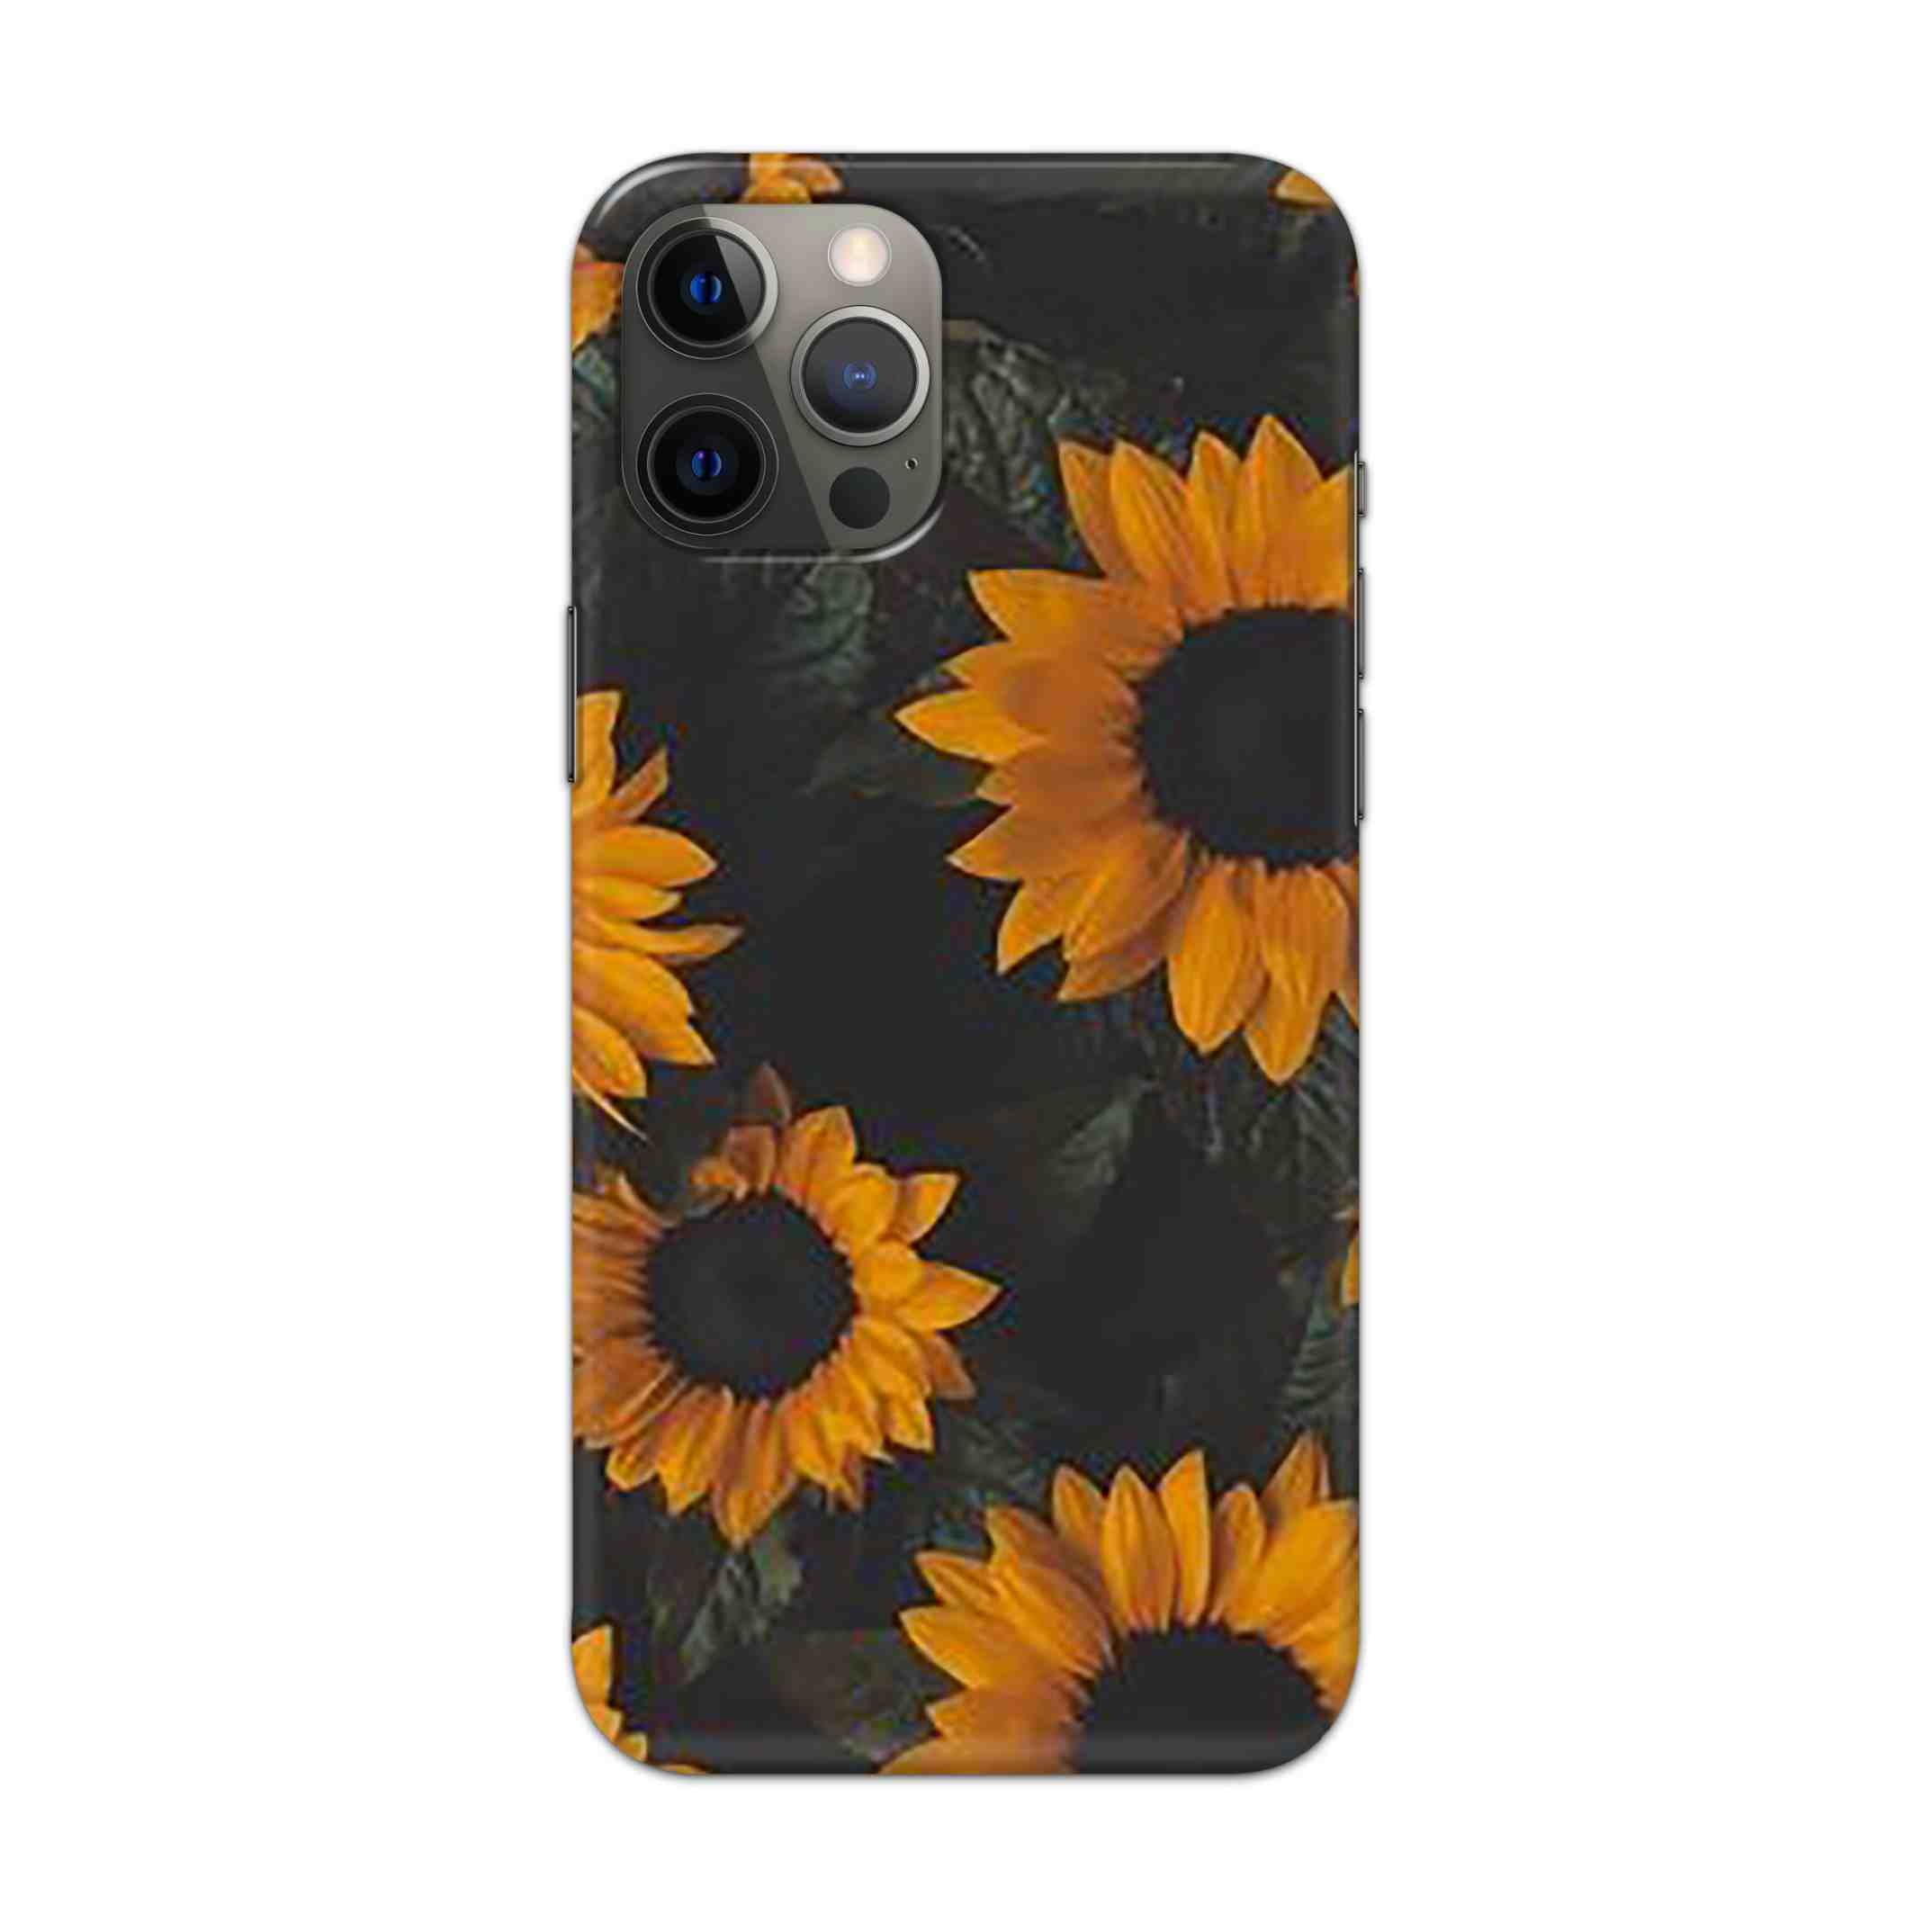 Buy Yellow Sunflower Hard Back Mobile Phone Case Cover For Apple iPhone 12 pro max Online